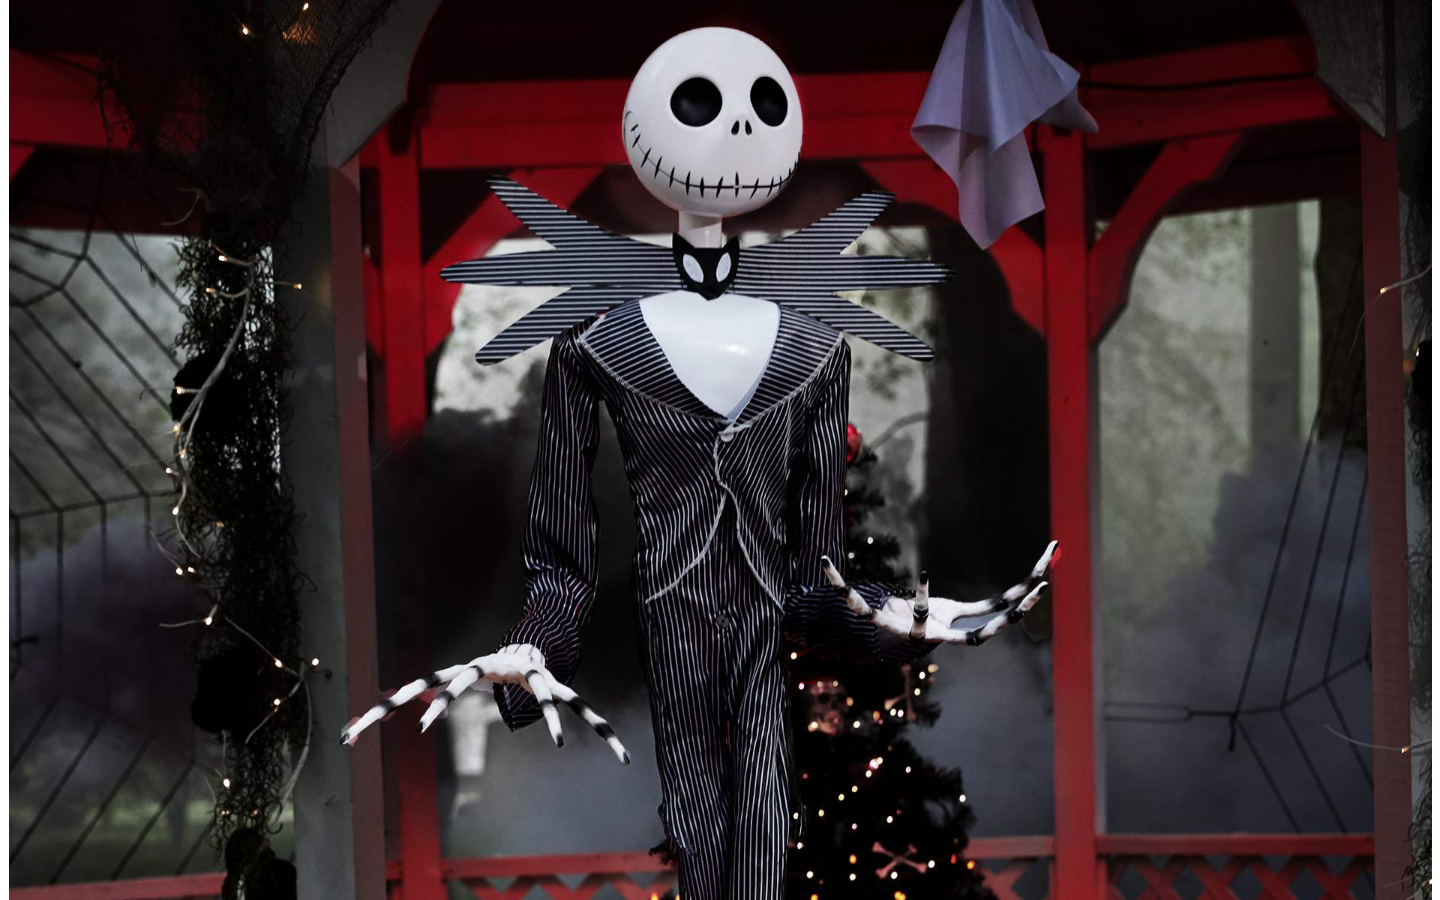 113-Foot-Tall Jack Skellington From The Home Depot, 50% OFF